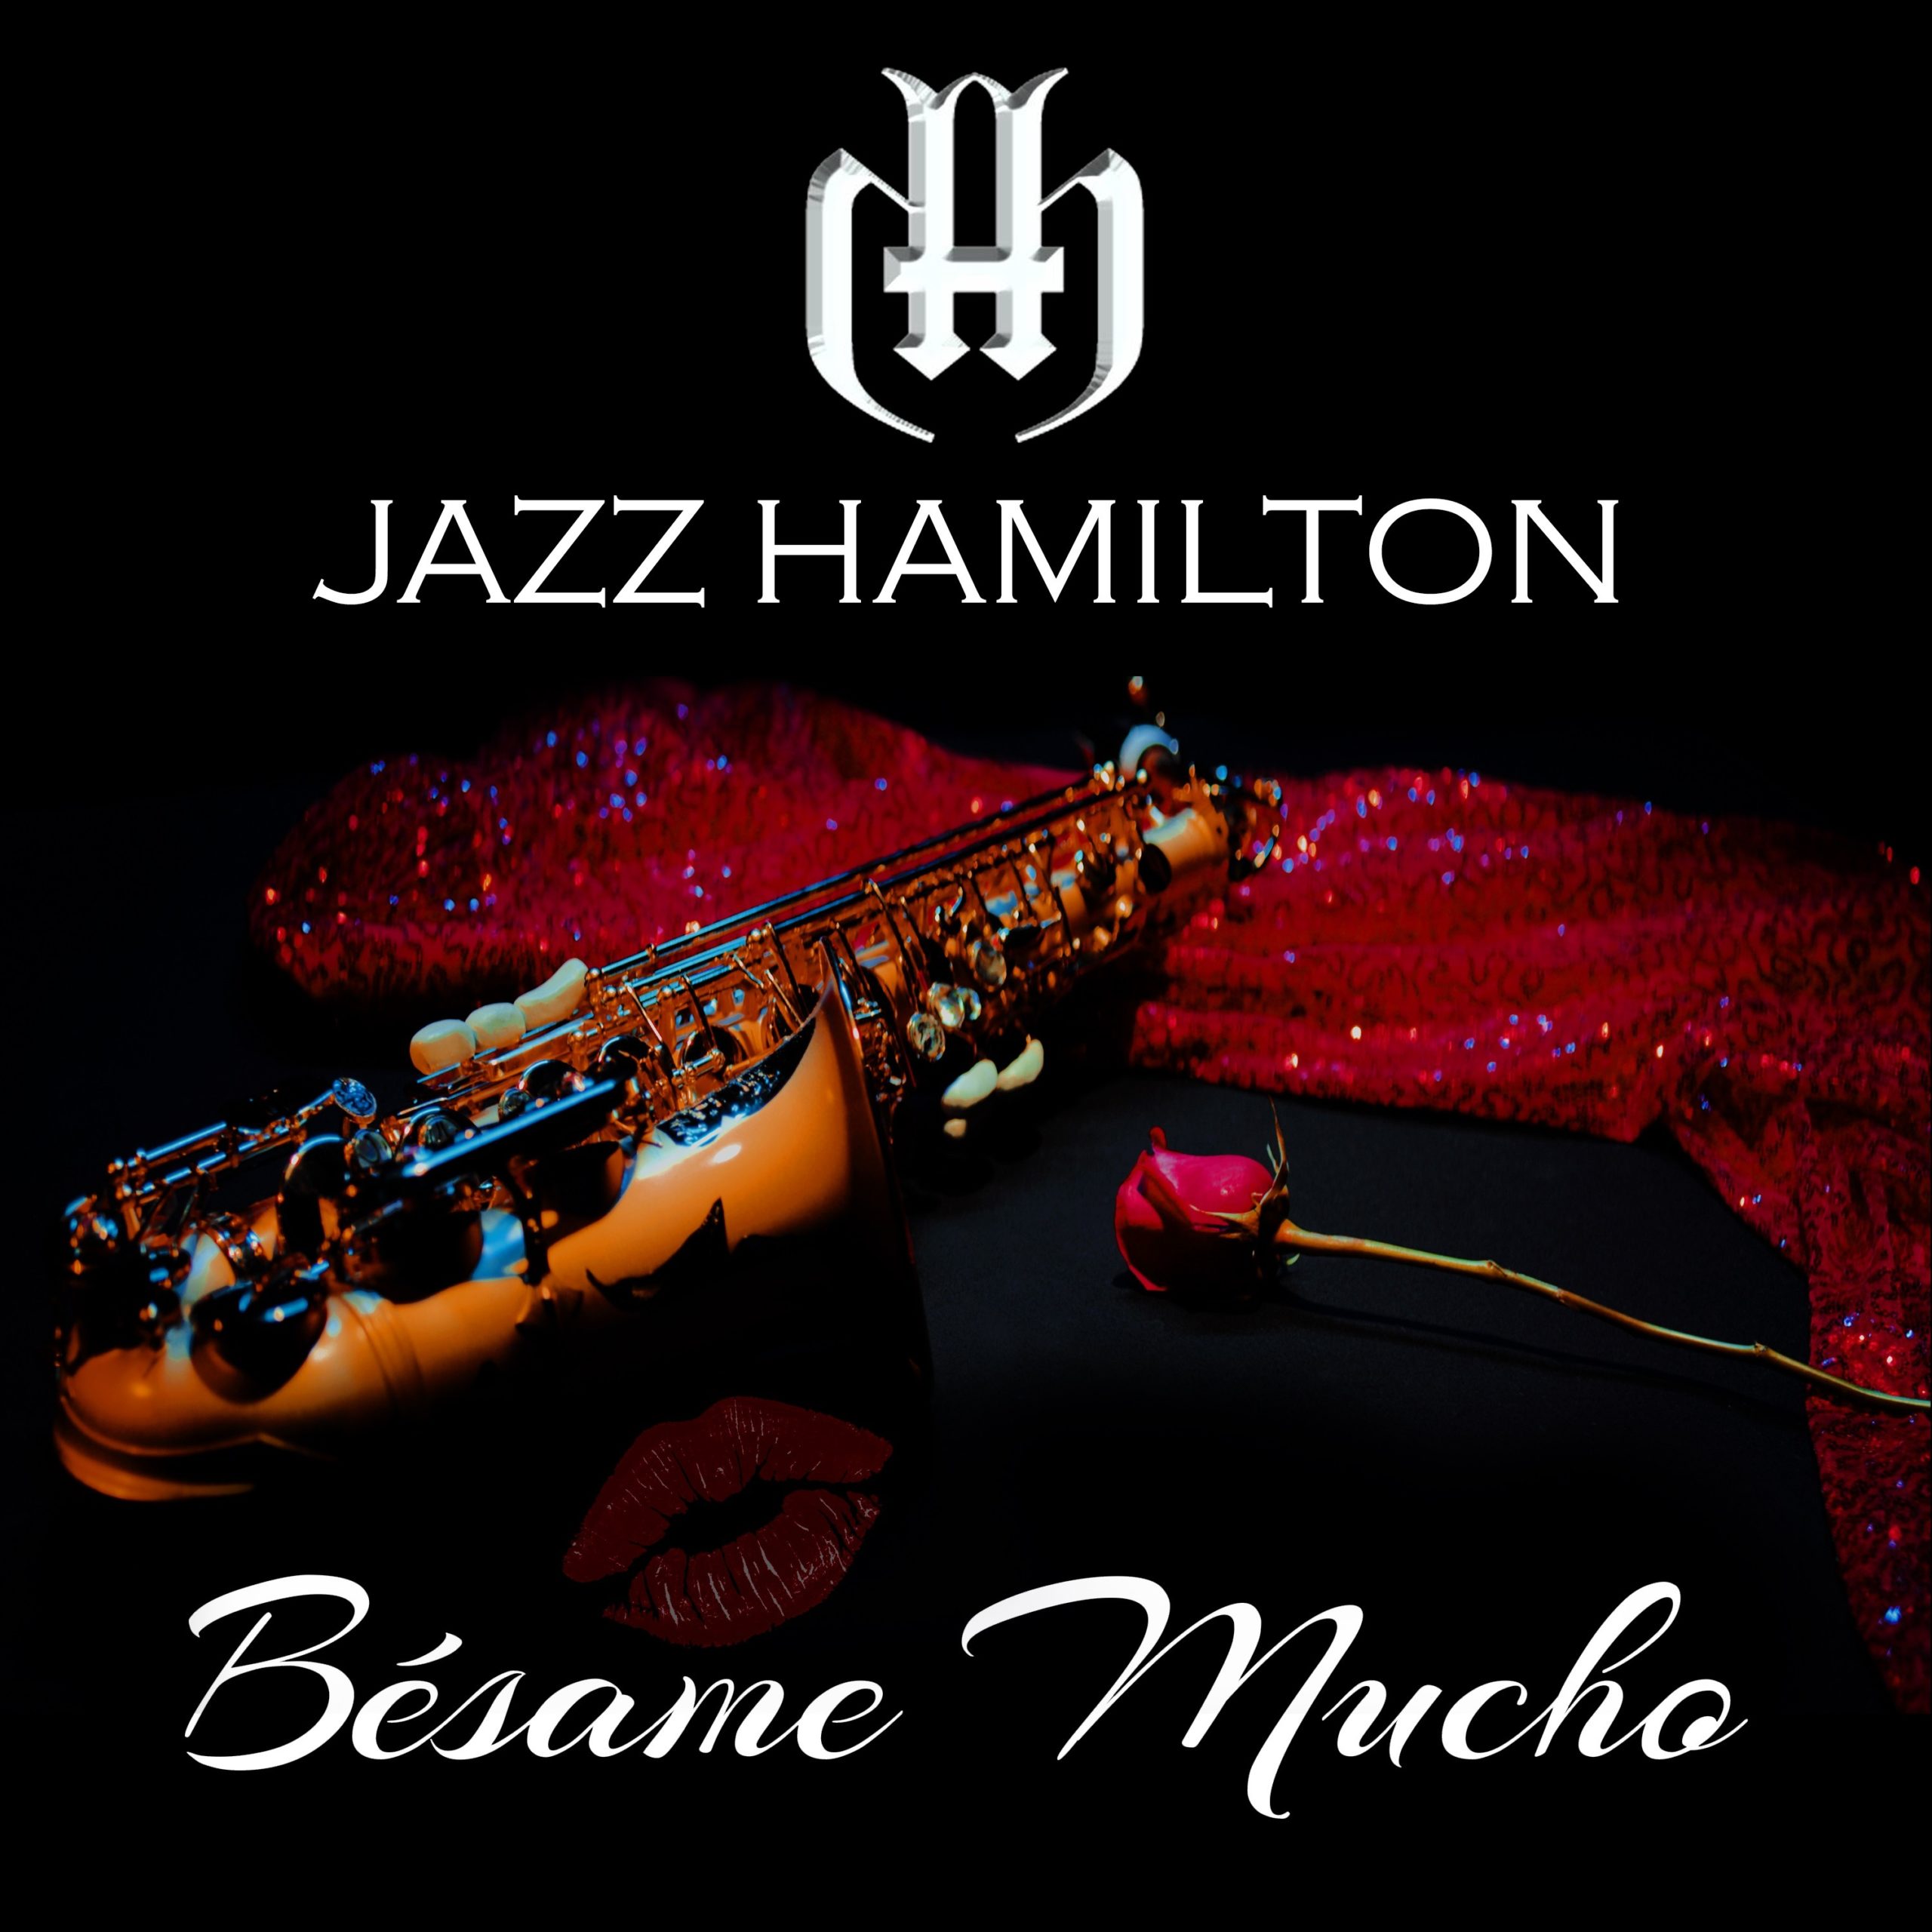 The New Epitome of Latin Jazz ‘Besame Mucho’ is All Set to Take the